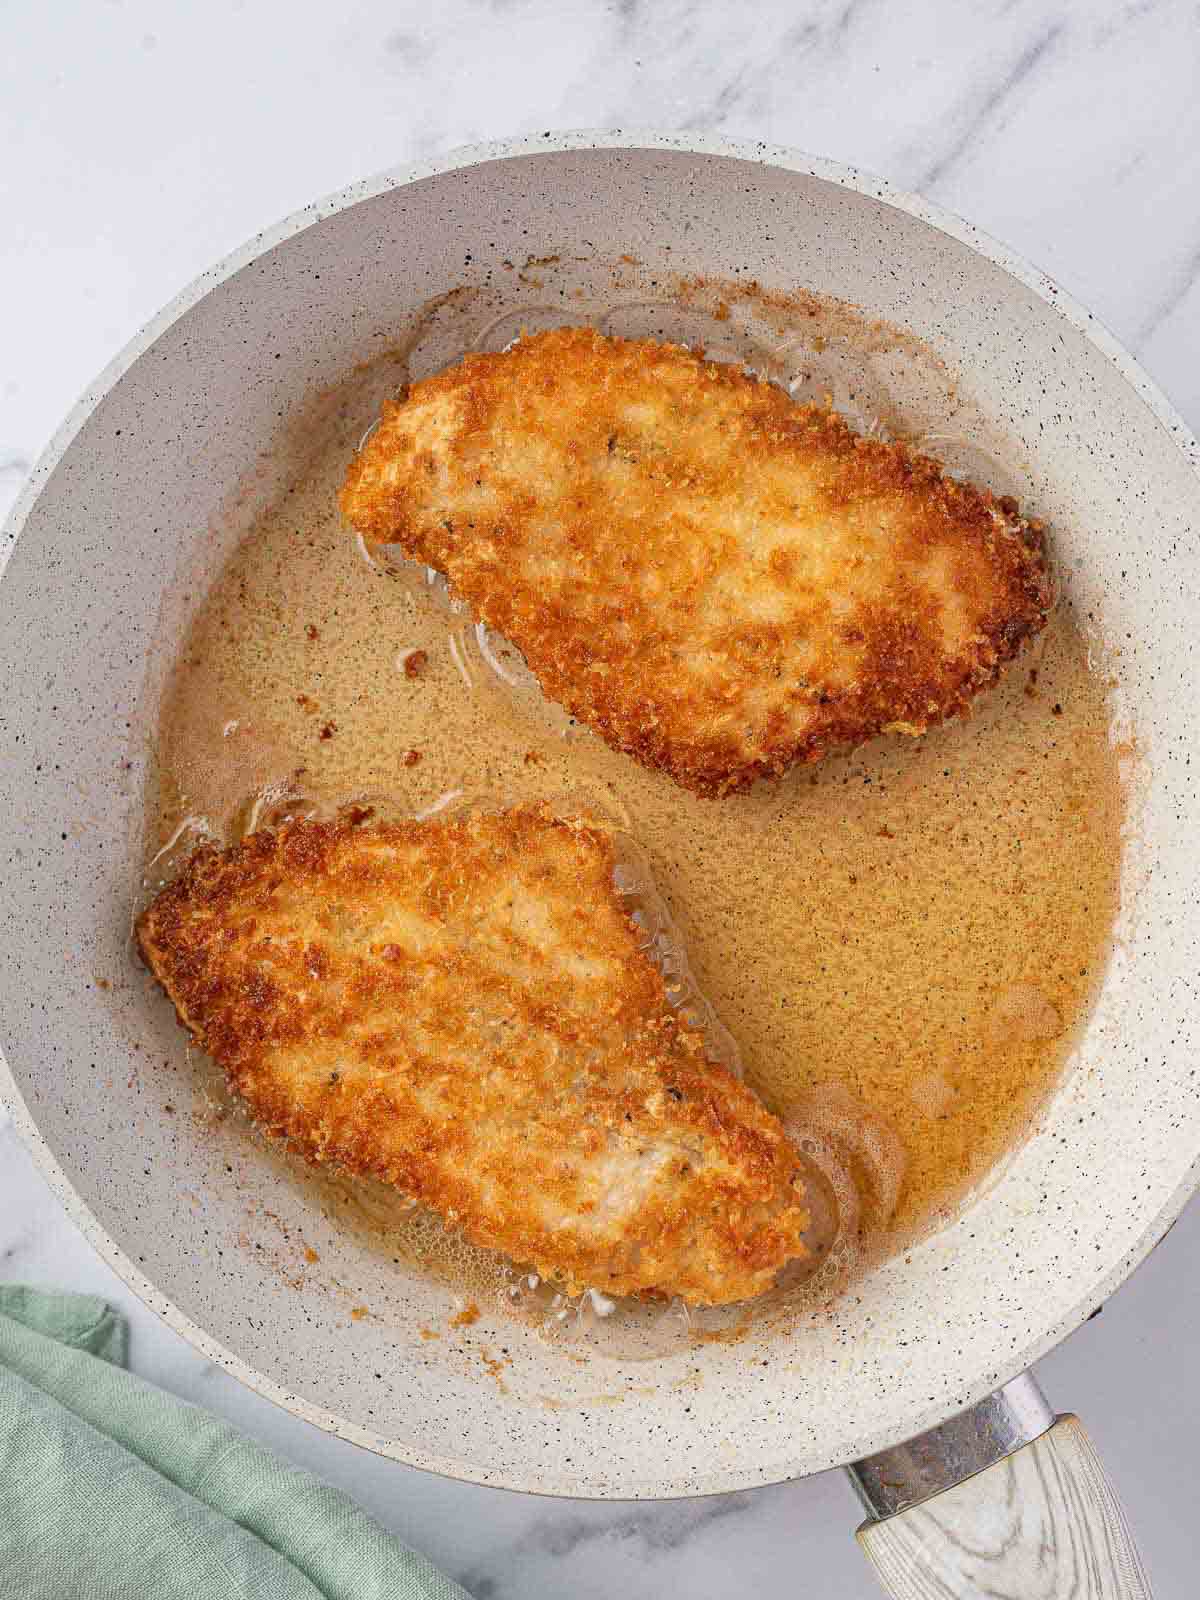 Pan fried chicken breasts.